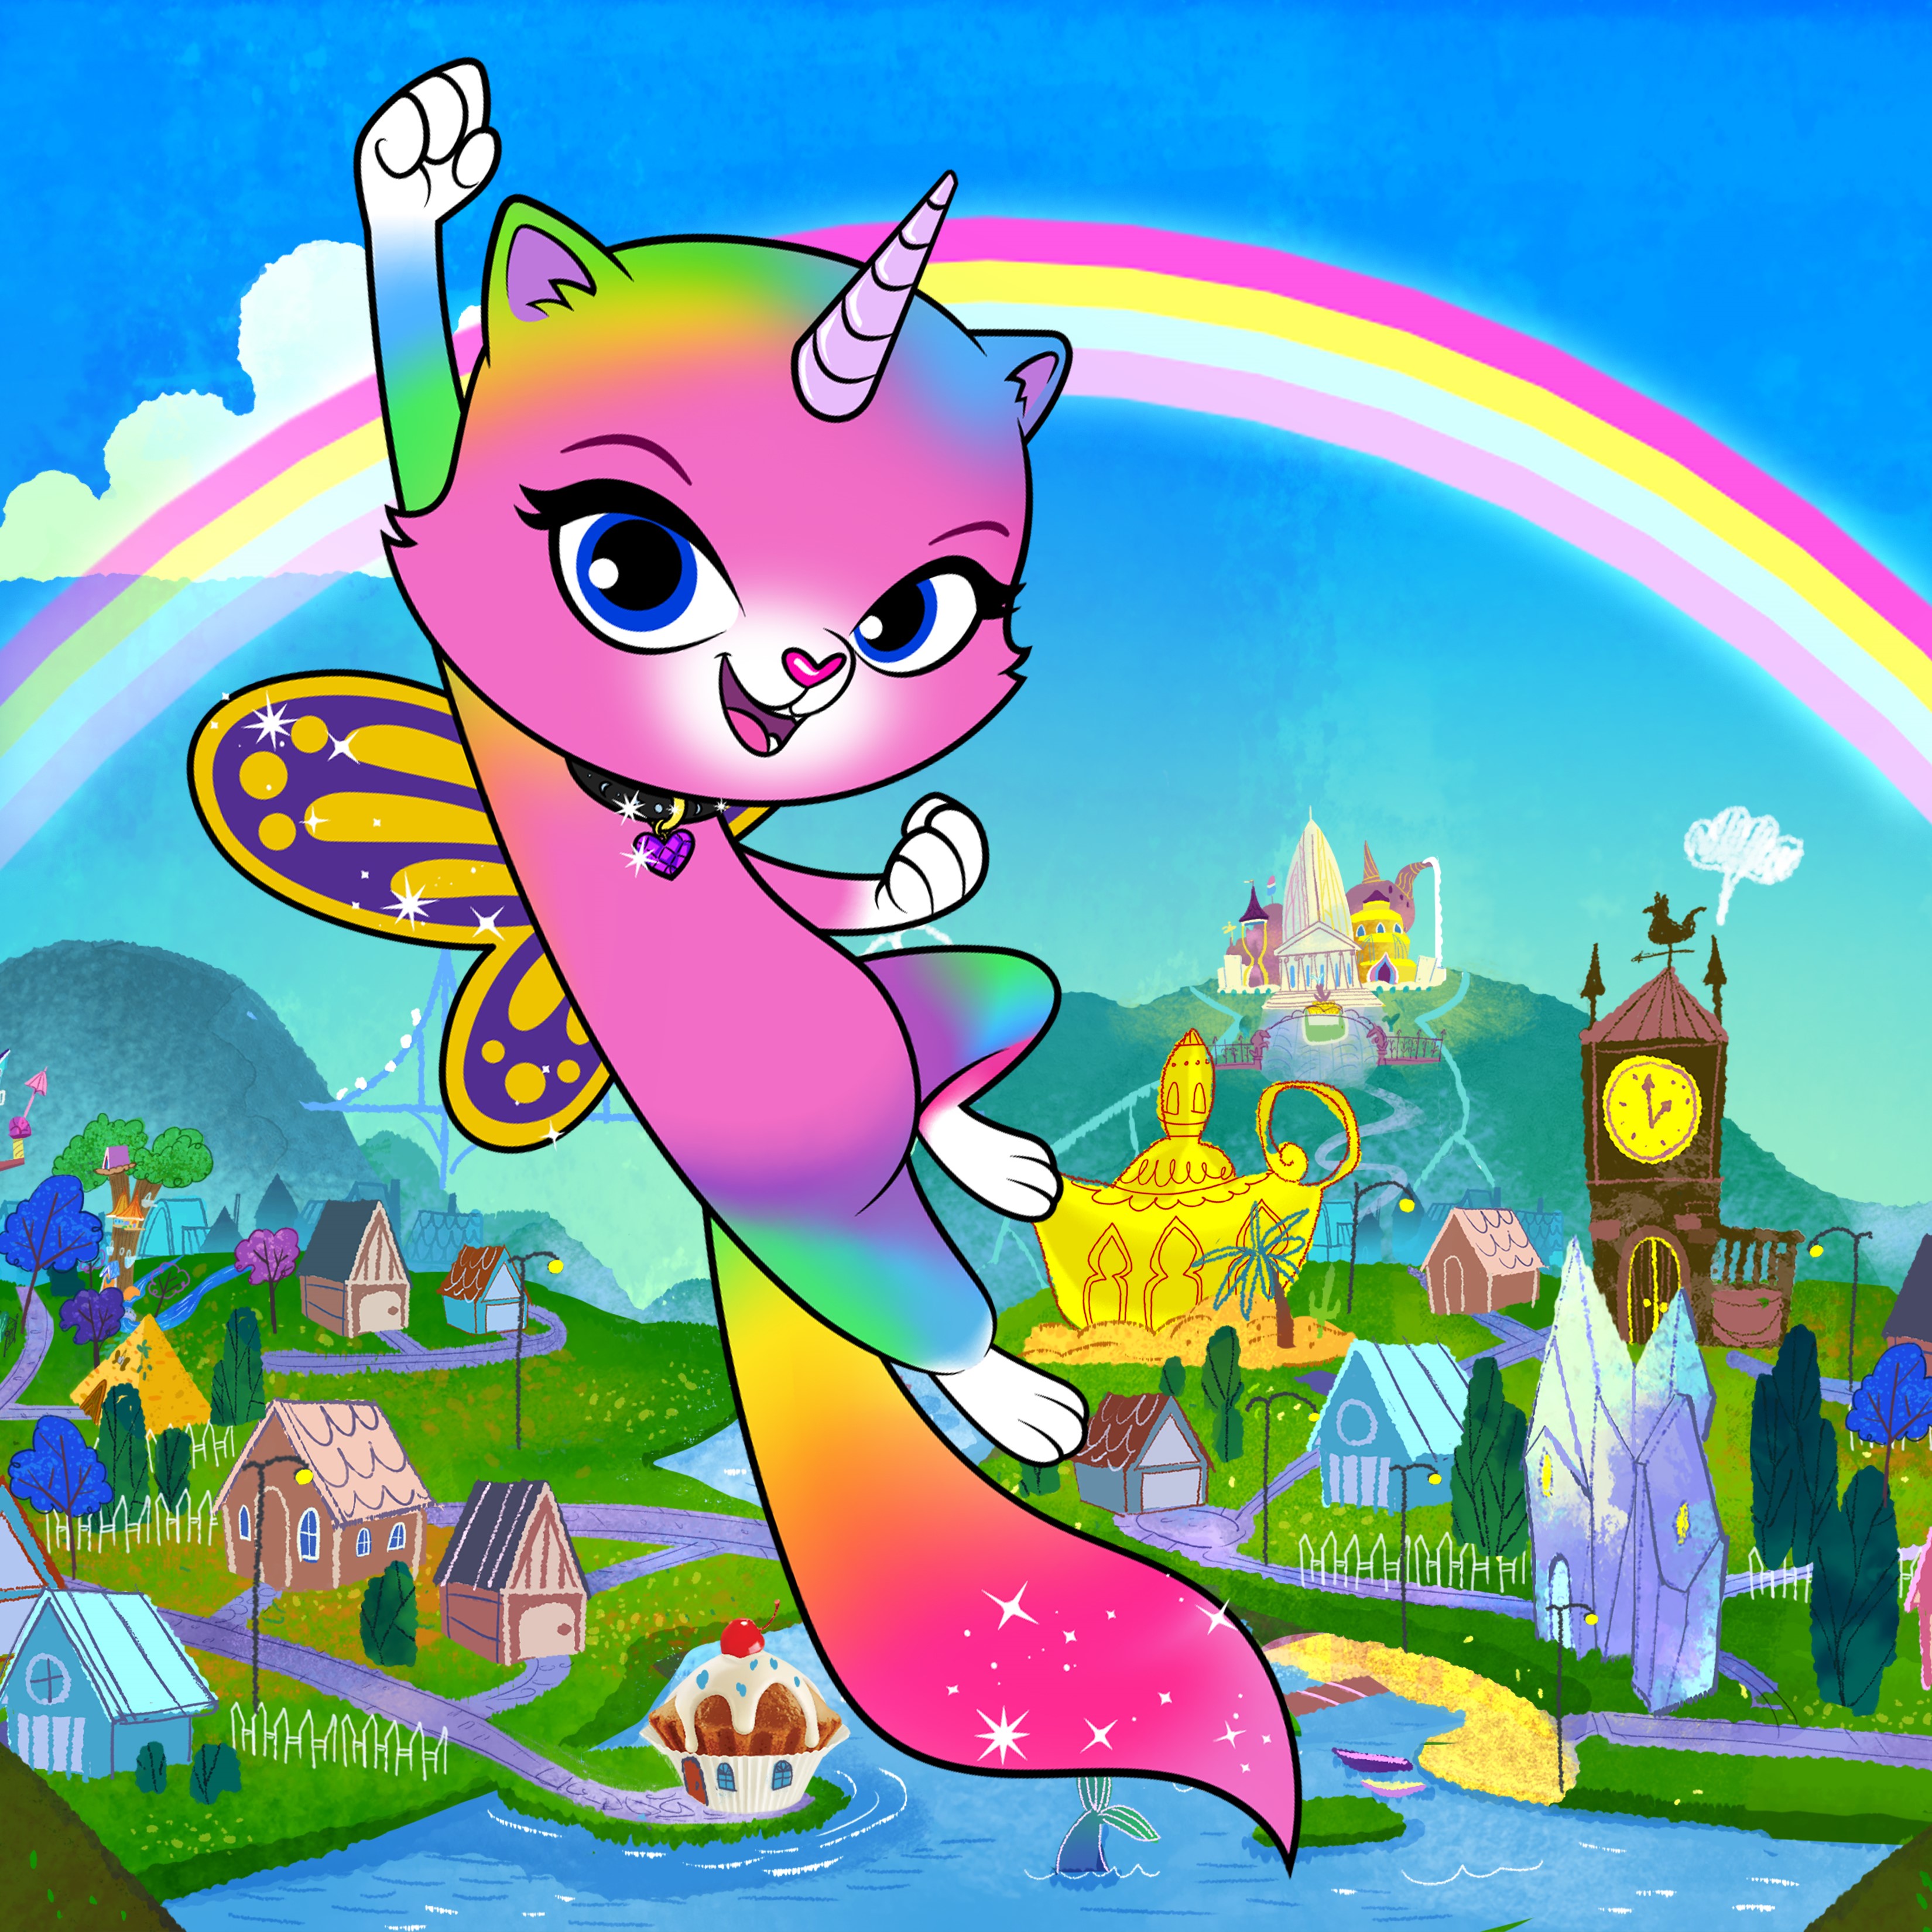 Rainbow Butterfly Unicorn Kitty: Nickelodeon Surprises Fans with New  Animated Series